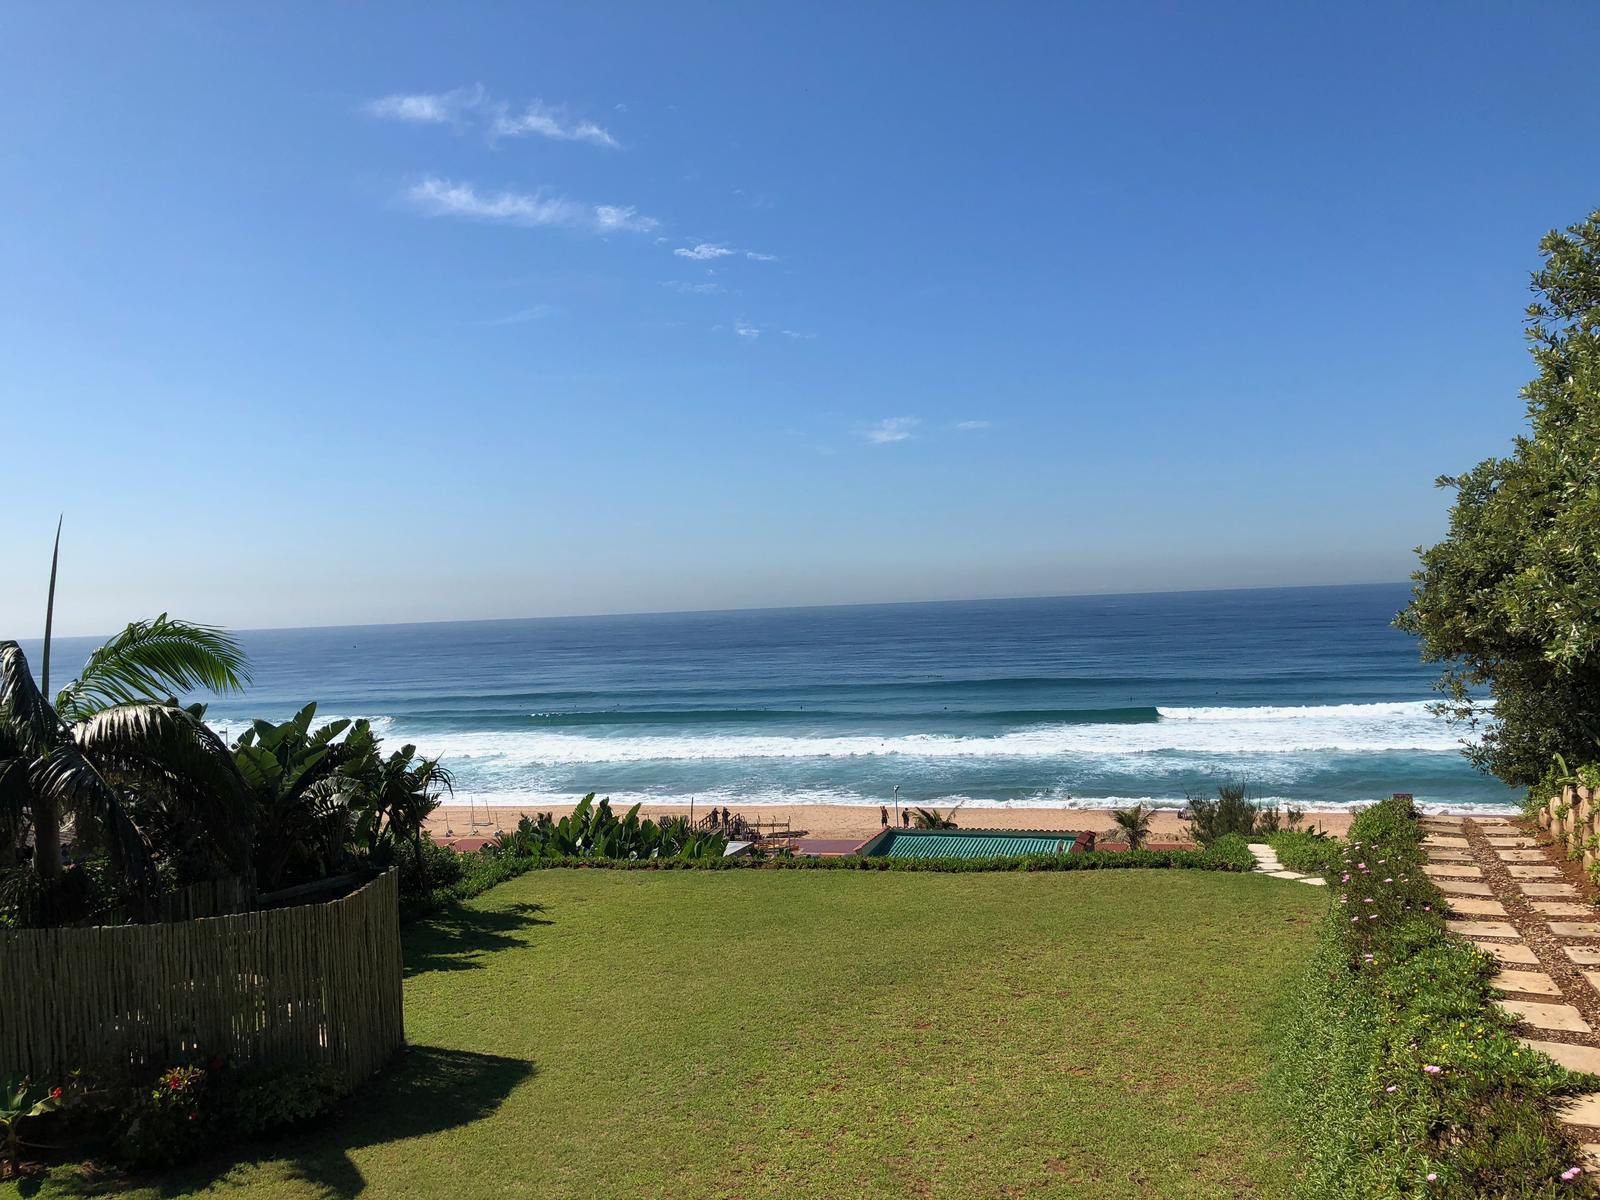 Ansteys Beach Self Catering And Backpackers The Bluff Durban Kwazulu Natal South Africa Complementary Colors, Beach, Nature, Sand, Ocean, Waters